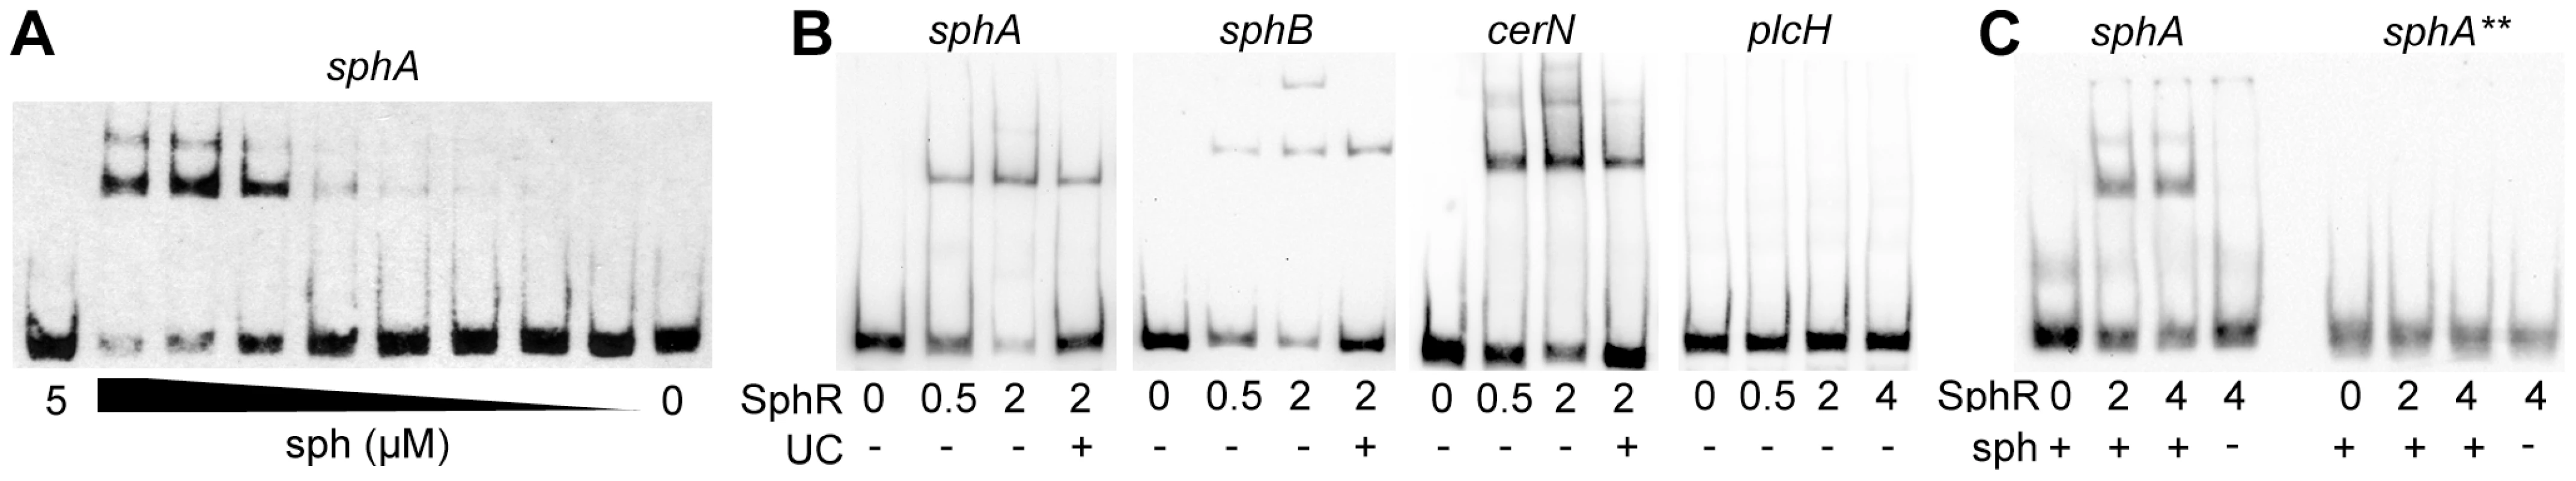 SphR directly binds to its target regulatory regions and binding is stimulated by sphingosine.